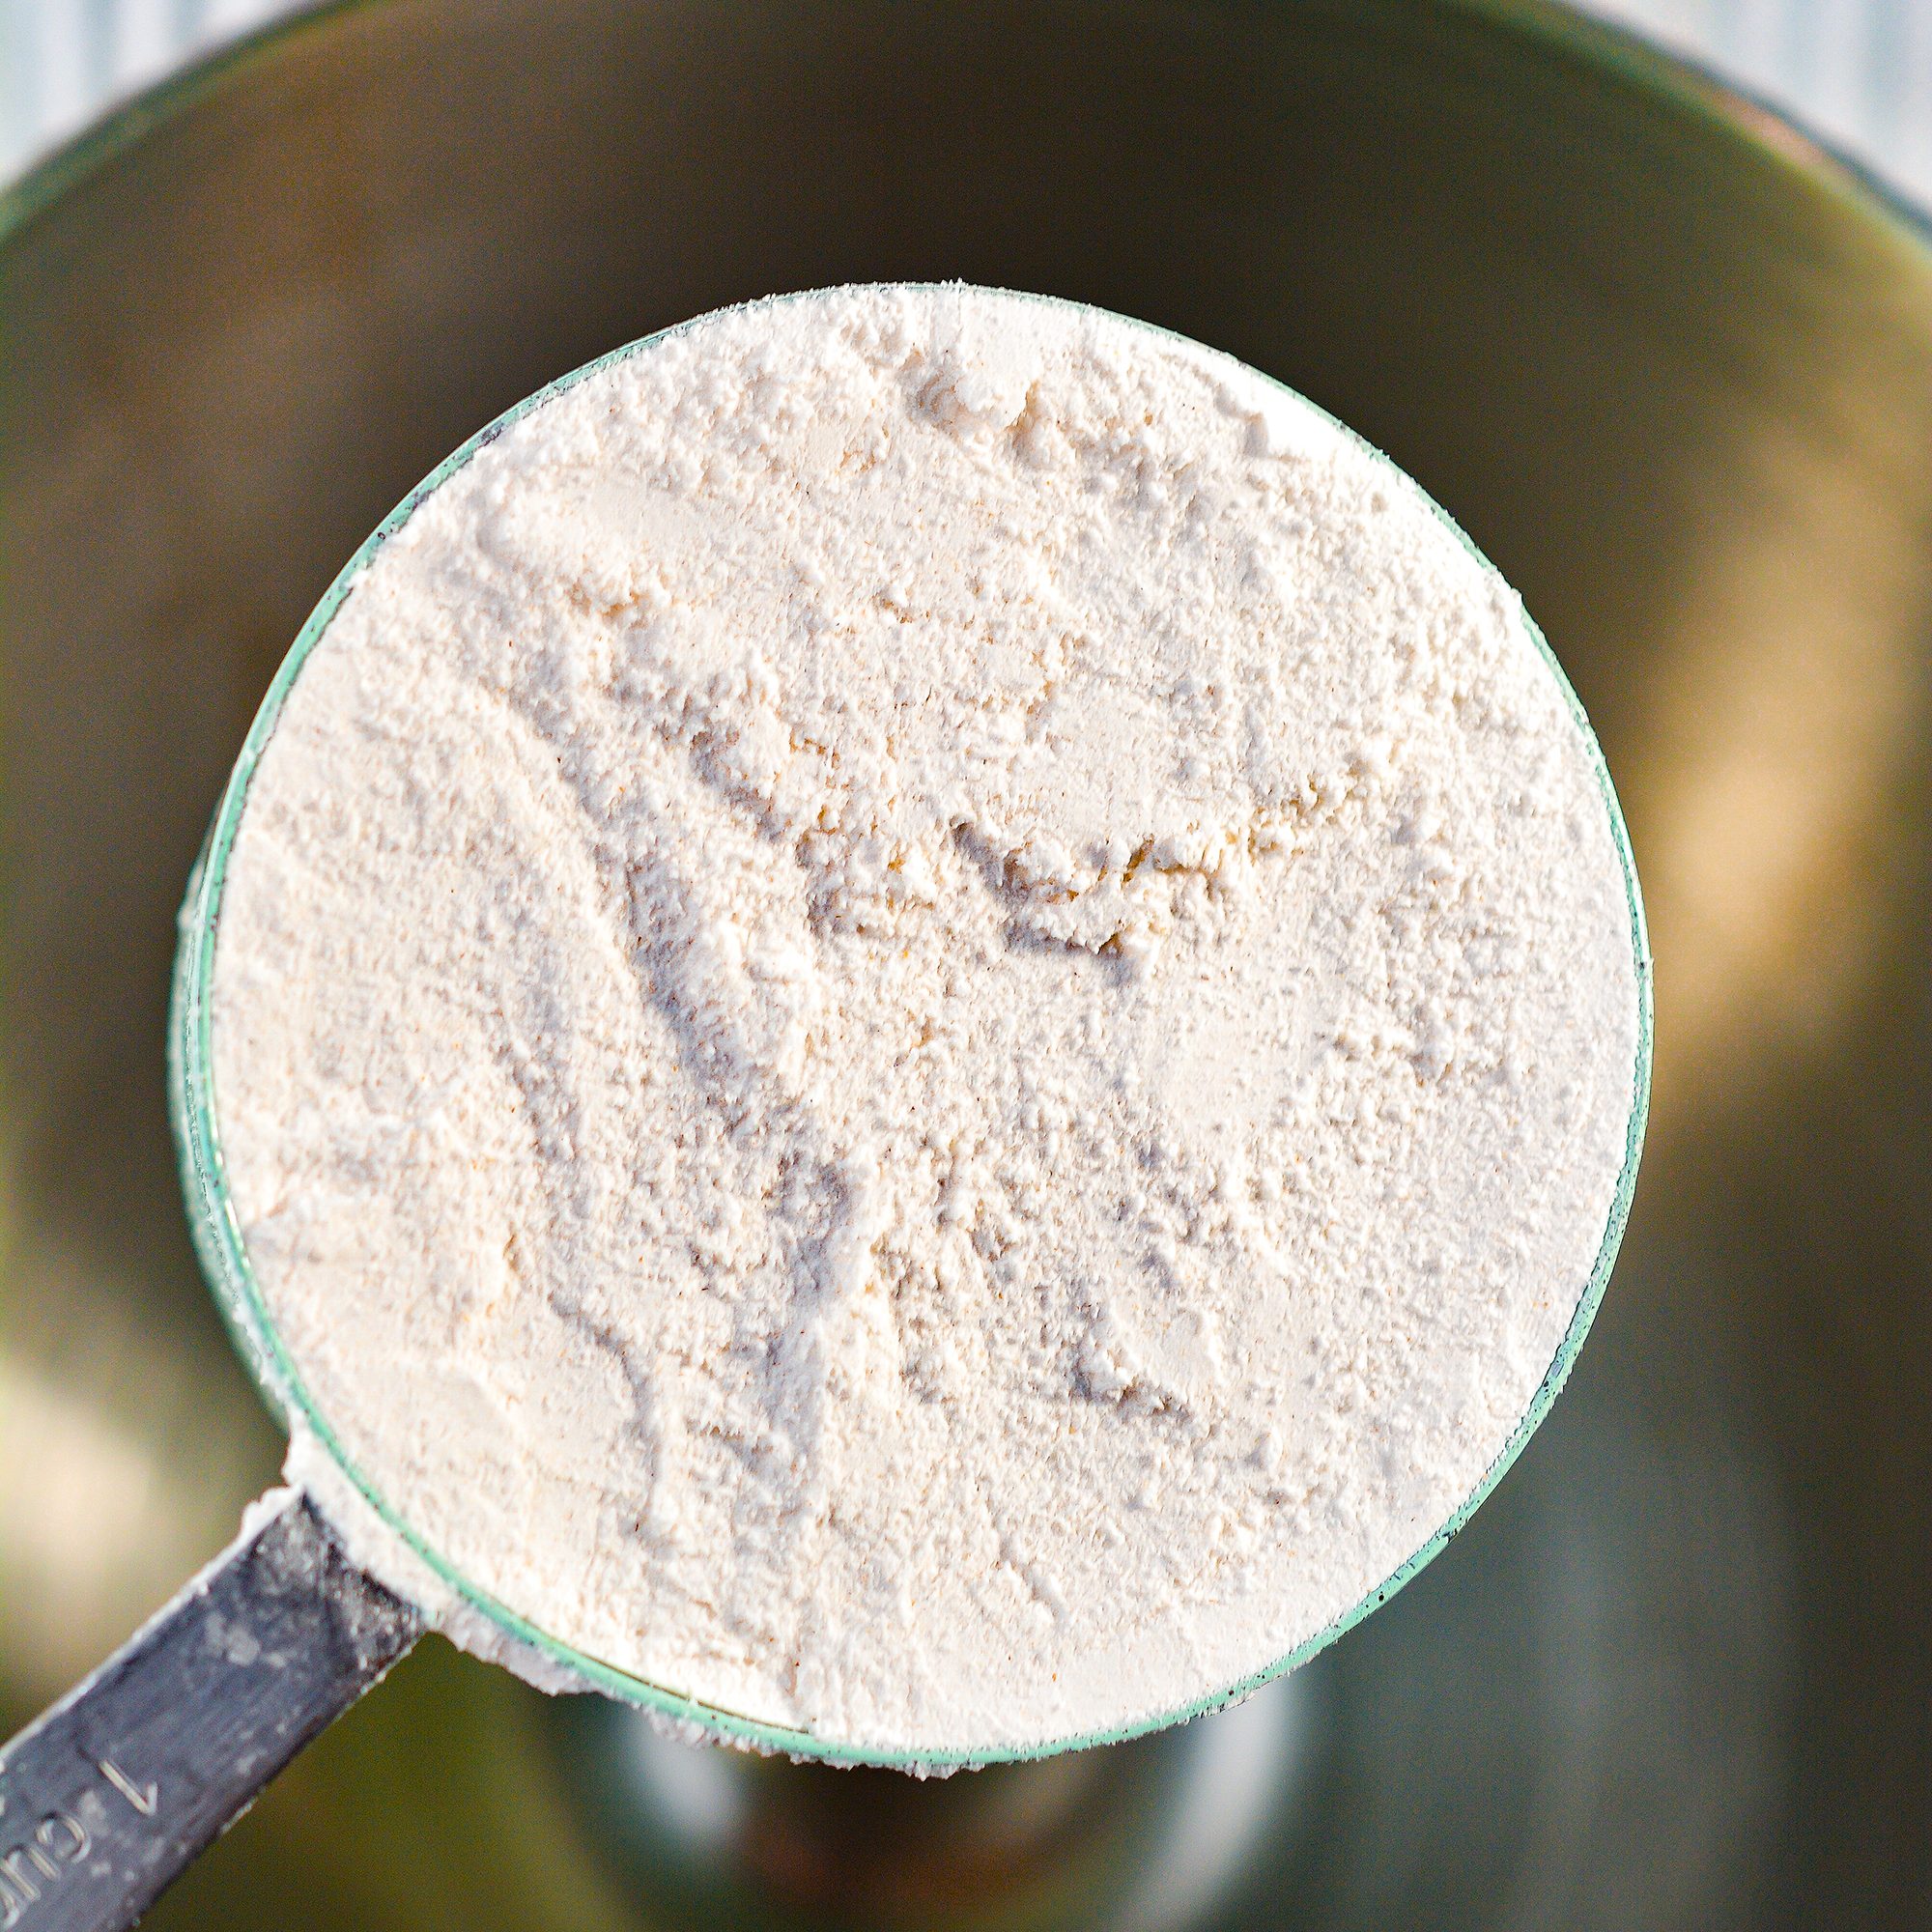 In a mixing bowl, combine the flour, sugar, milk, baking powder, and a pinch of salt until well combined.